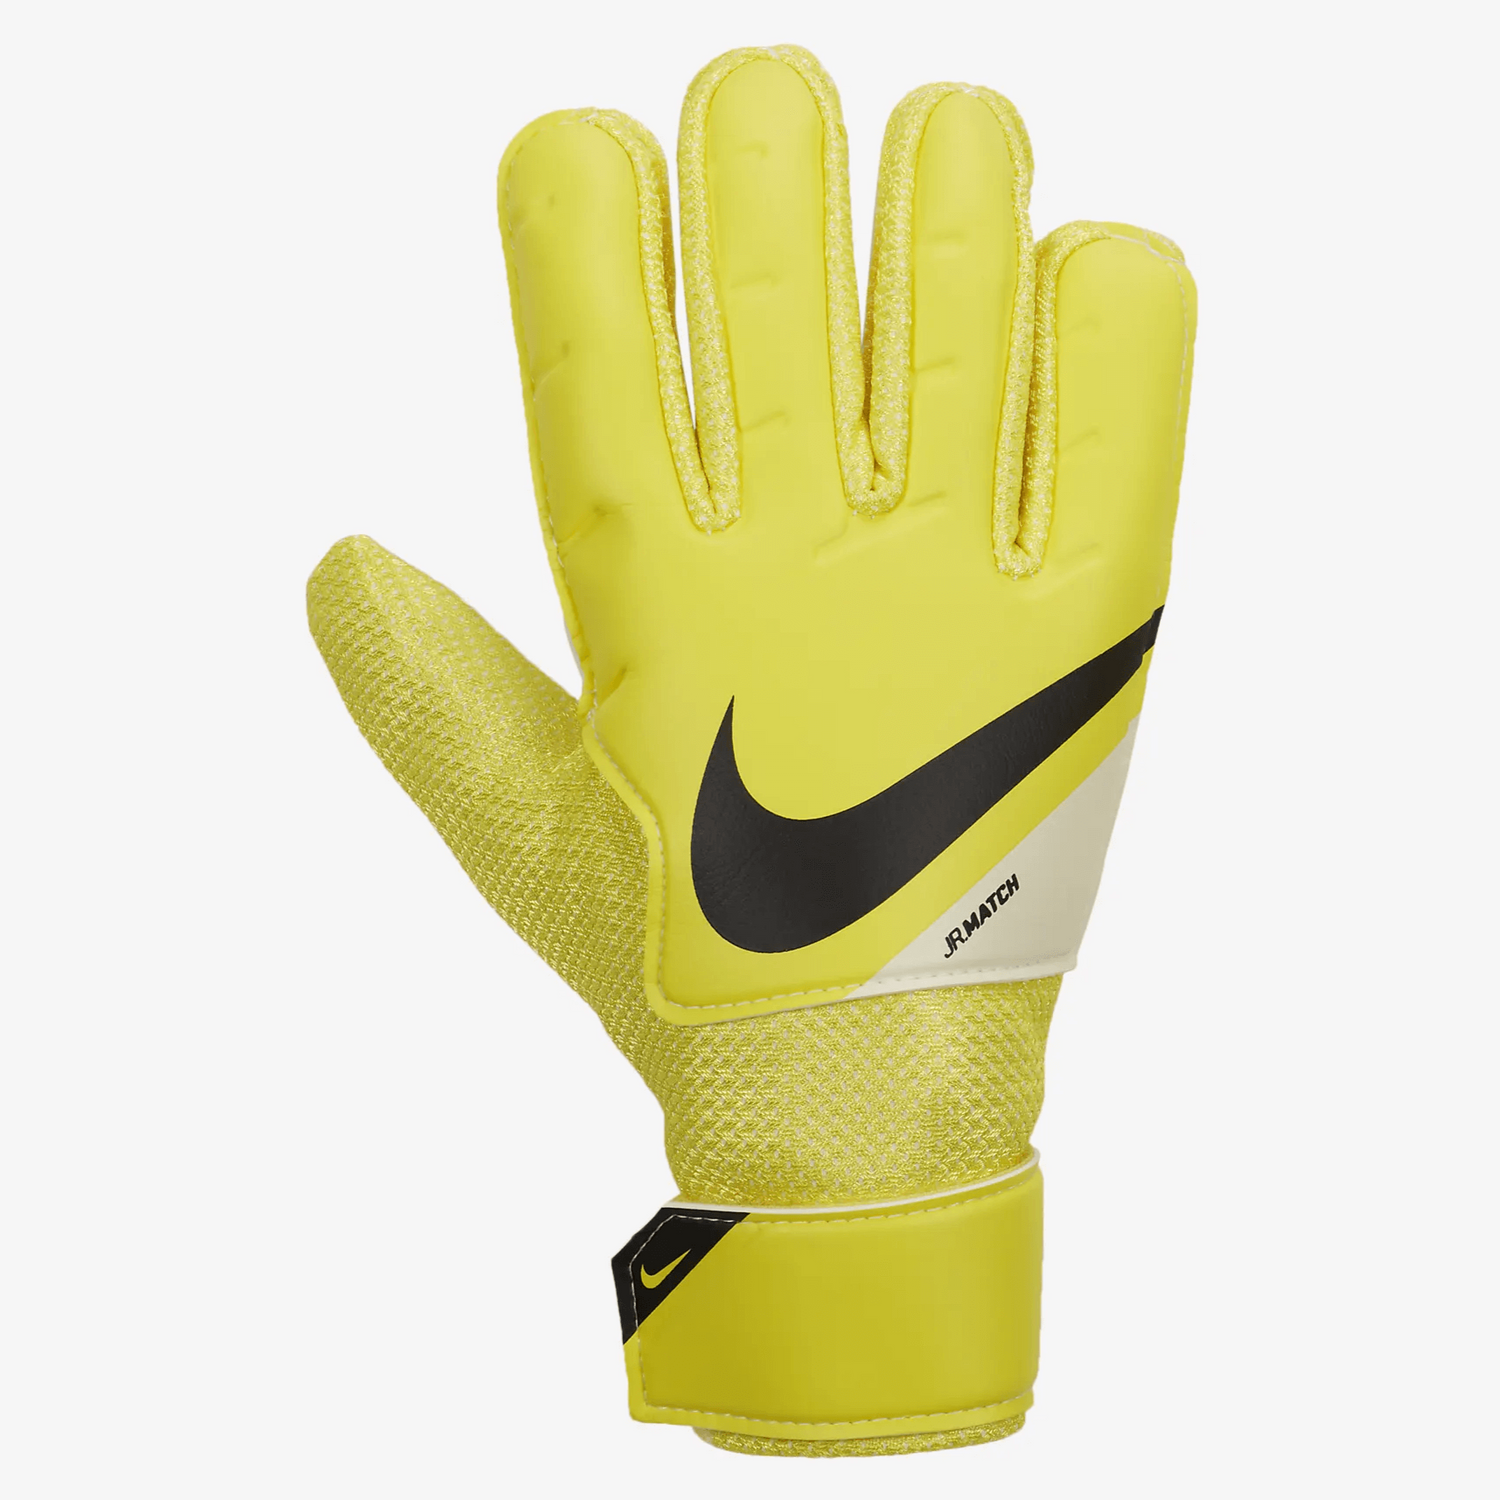 Nike Youth Match Goalkeeper Gloves Yellow-Black (Single - Outer)